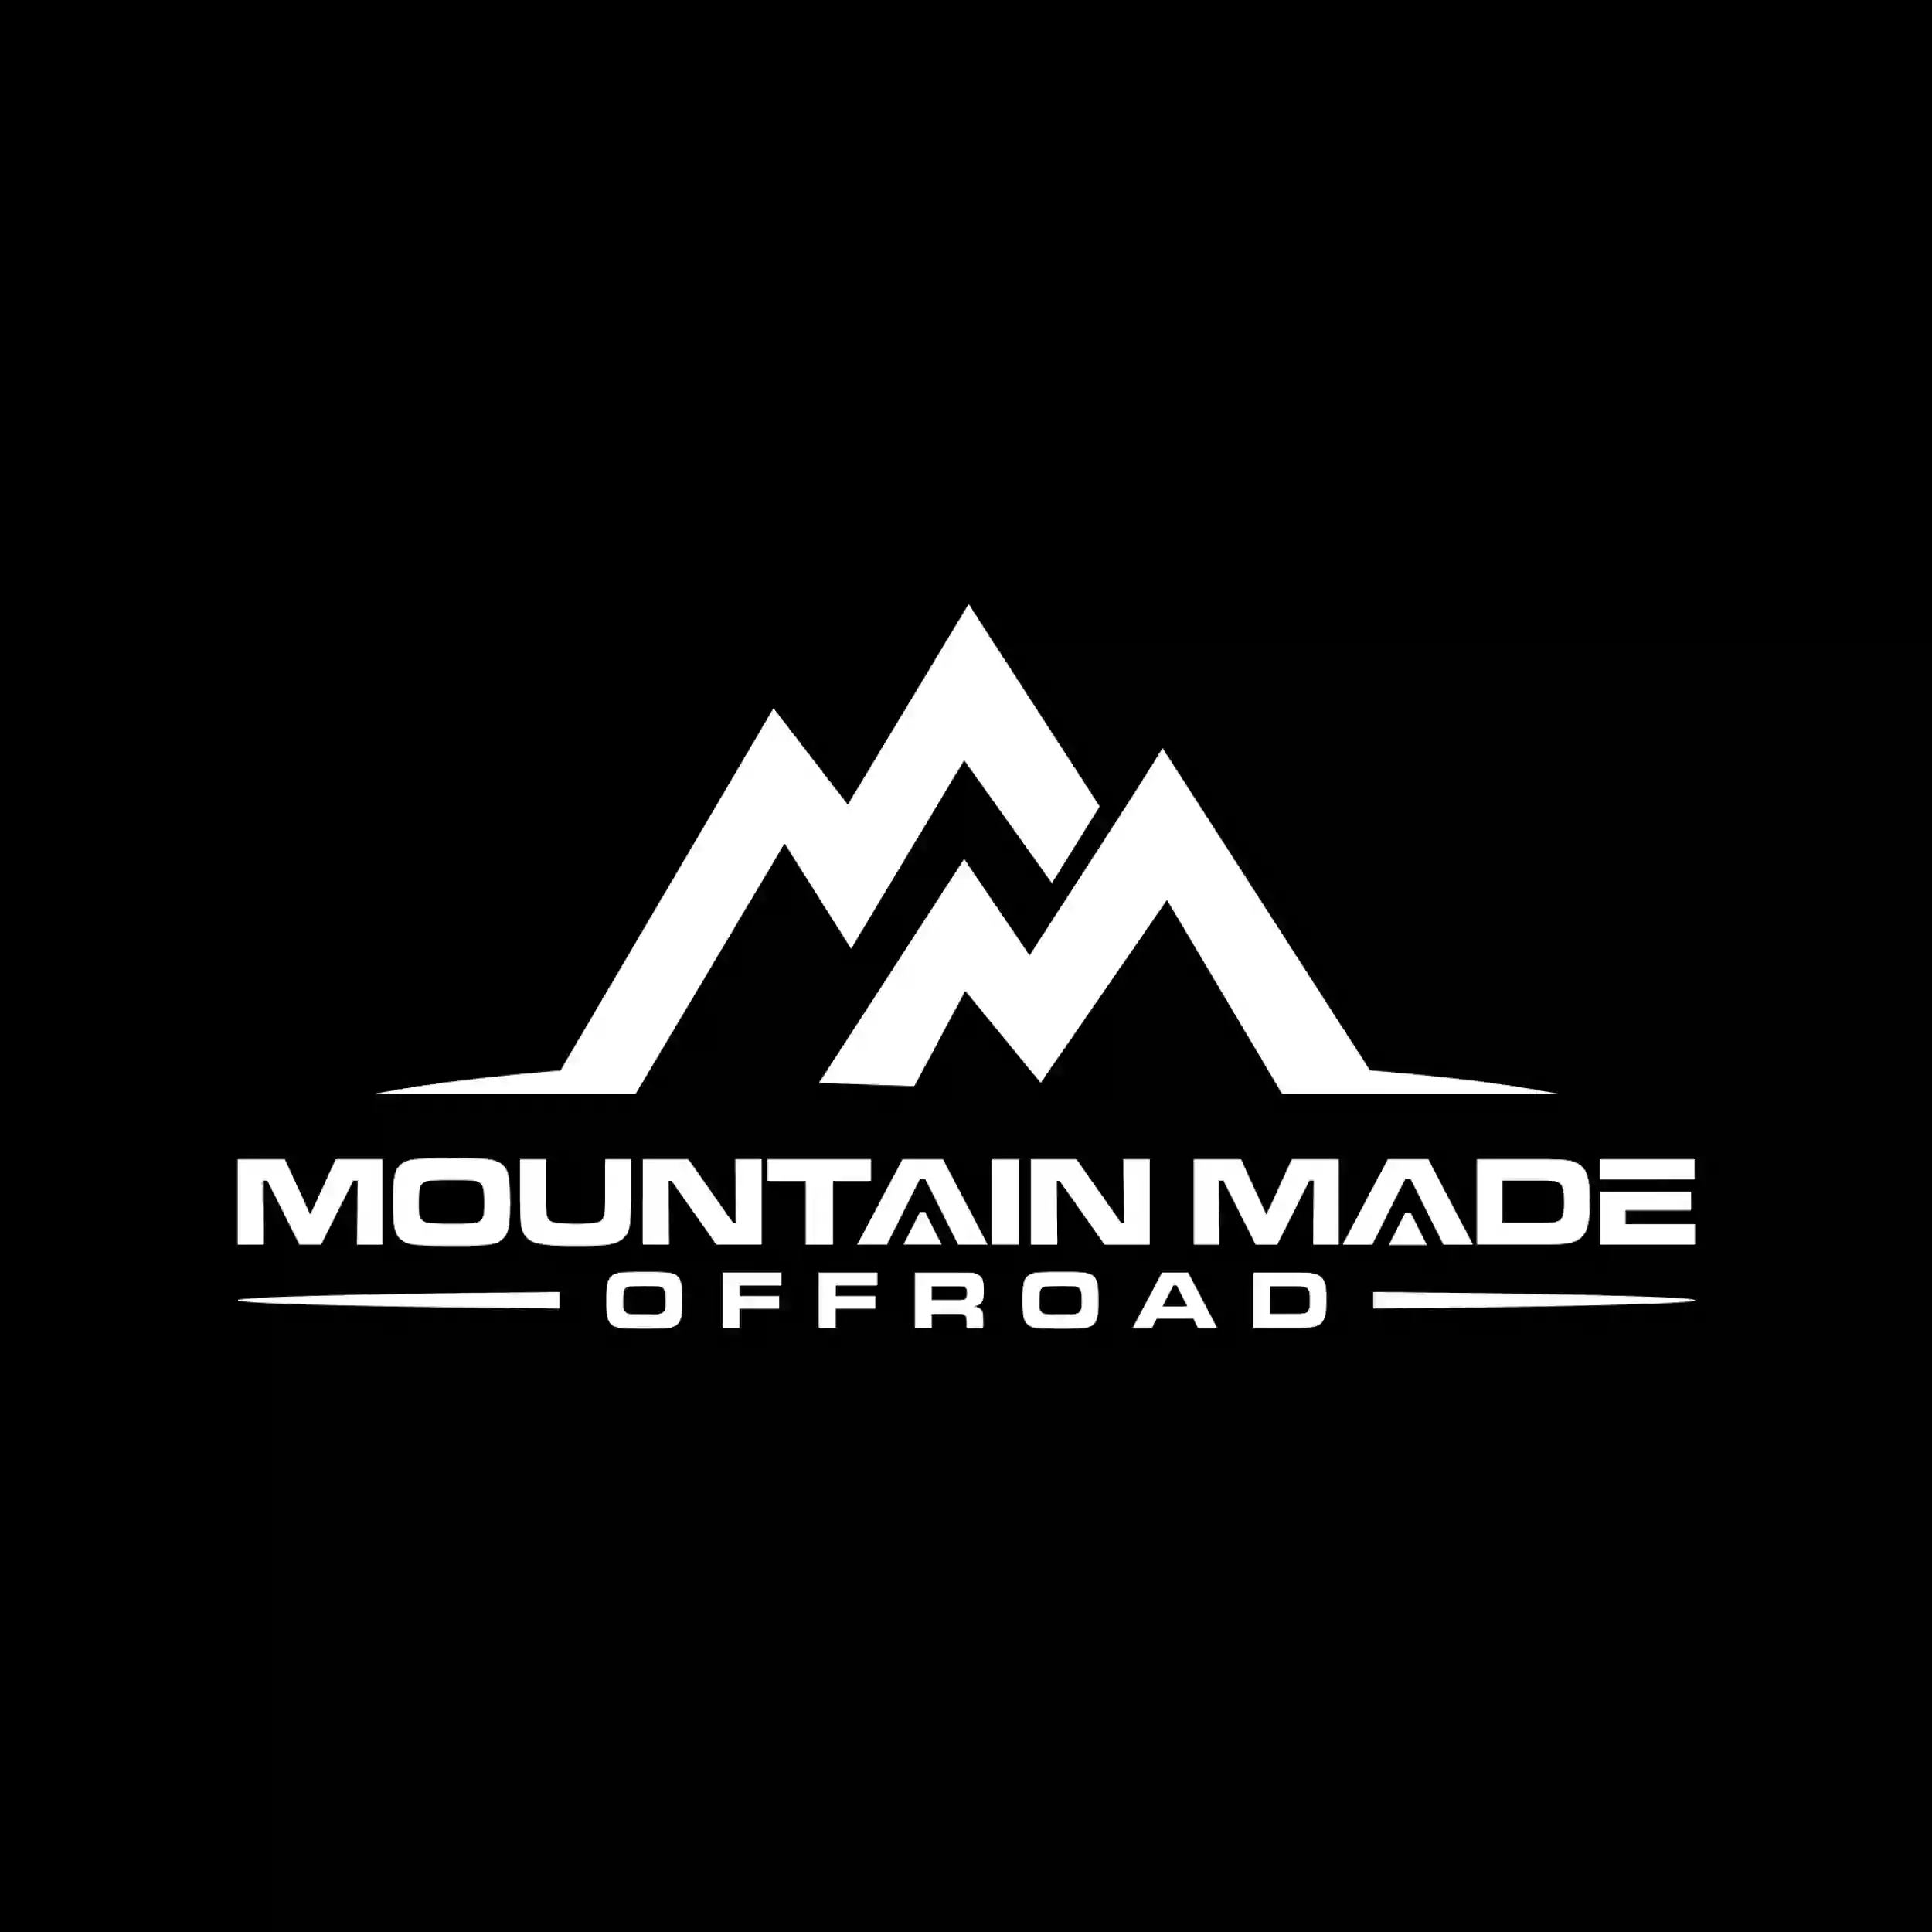 Mountain Made Offroad